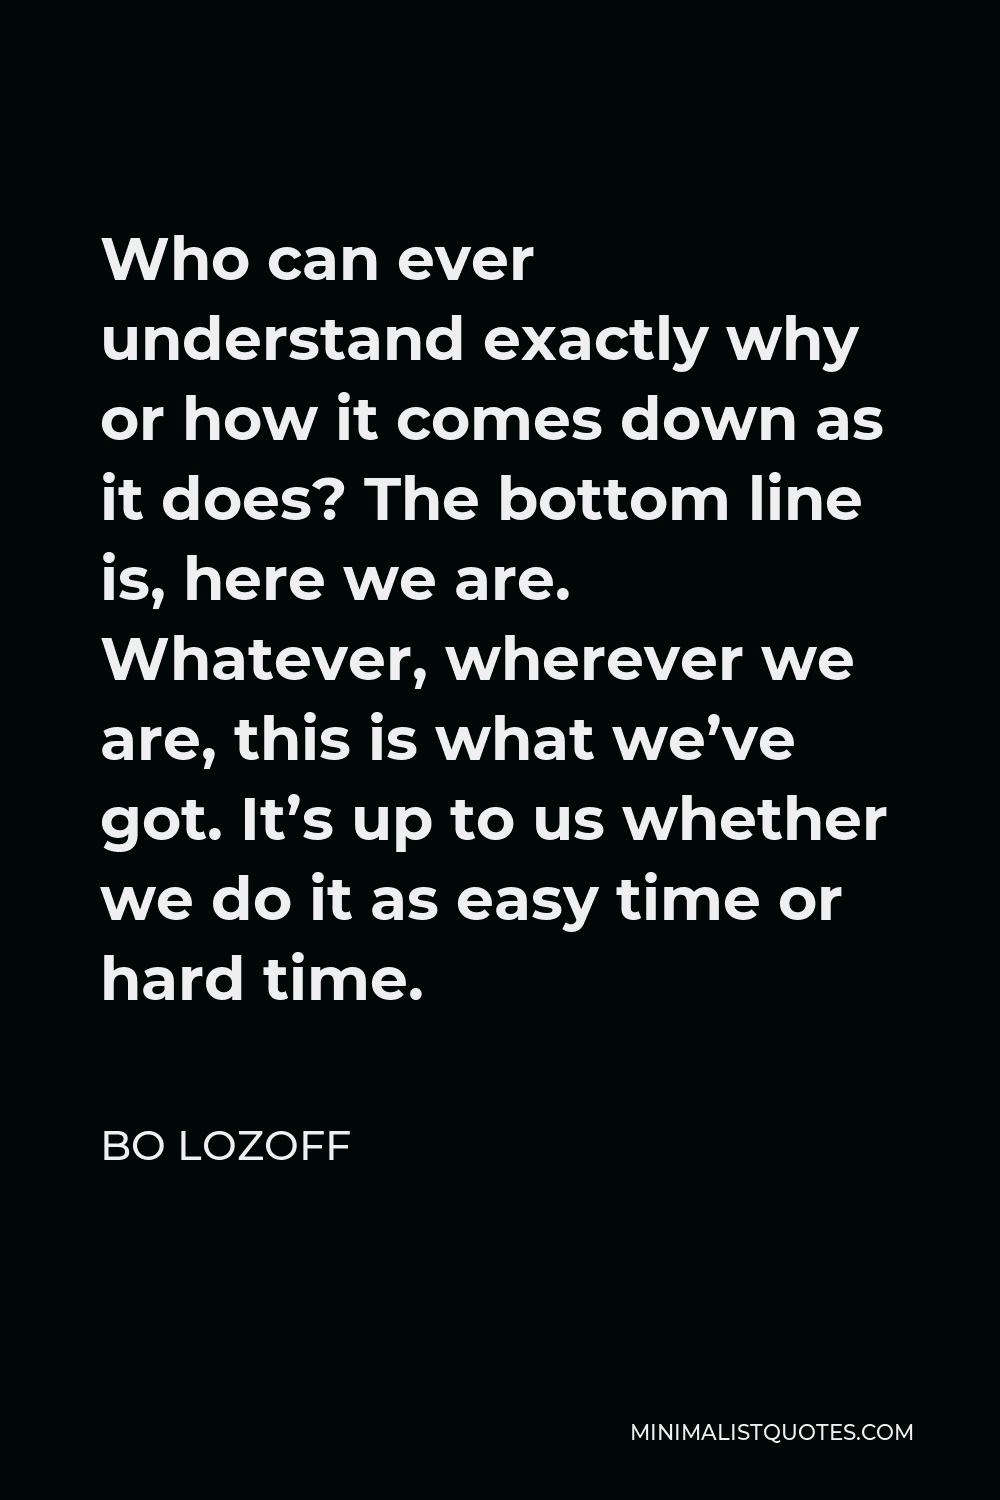 Bo Lozoff Quote - Who can ever understand exactly why or how it comes down as it does? The bottom line is, here we are. Whatever, wherever we are, this is what we’ve got. It’s up to us whether we do it as easy time or hard time.